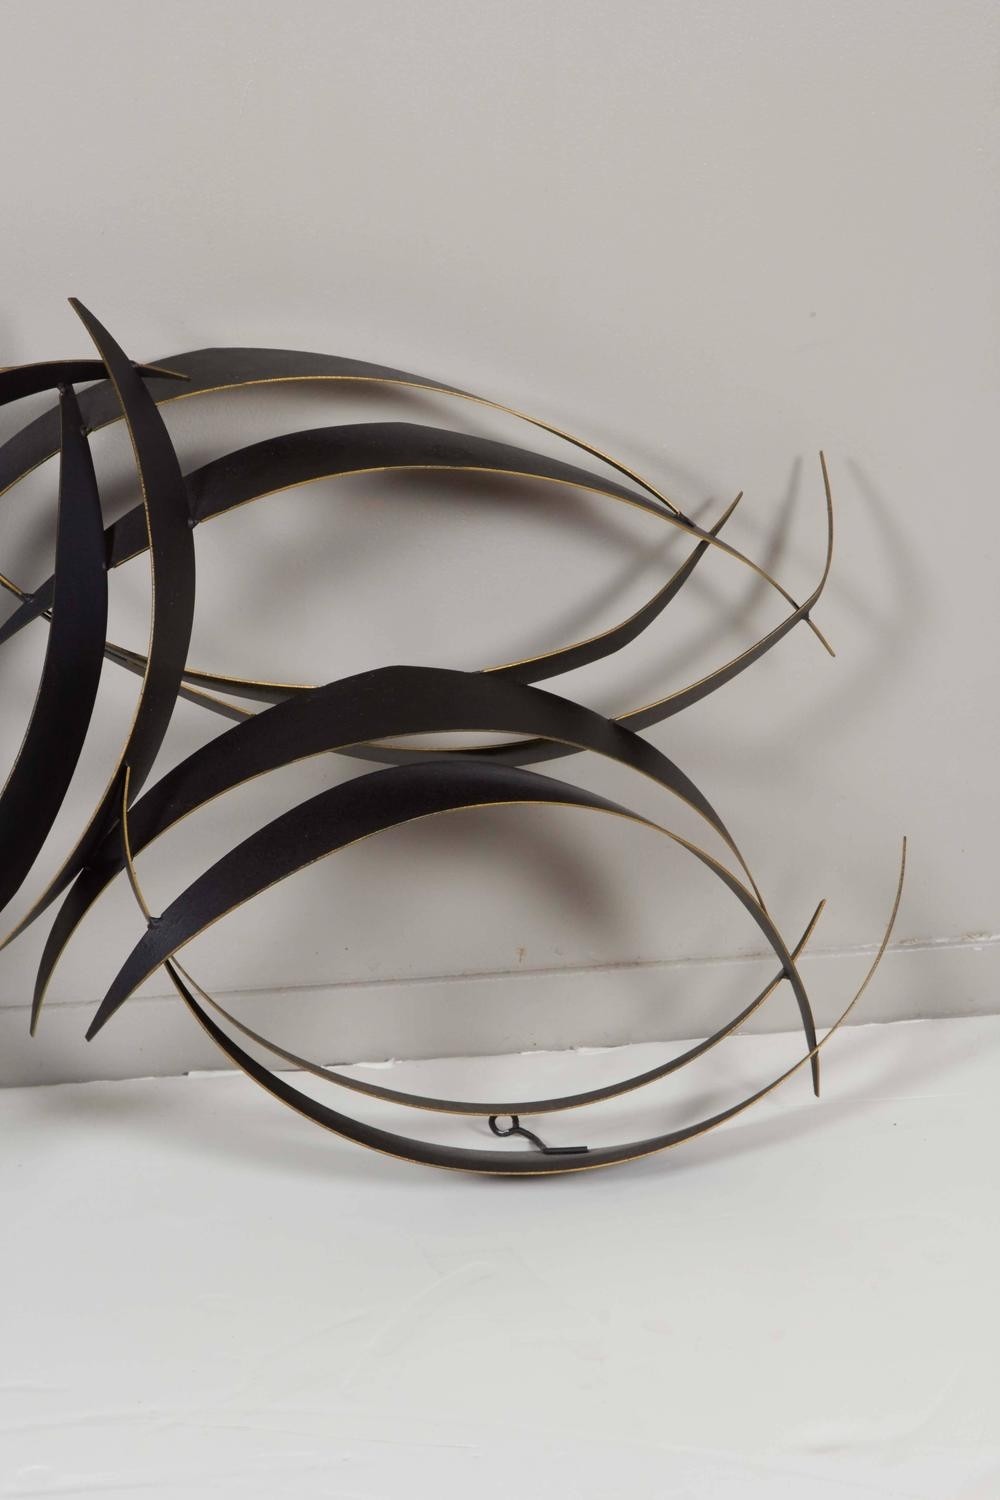 Curtis jere abstract black metal wall sculpture for sale